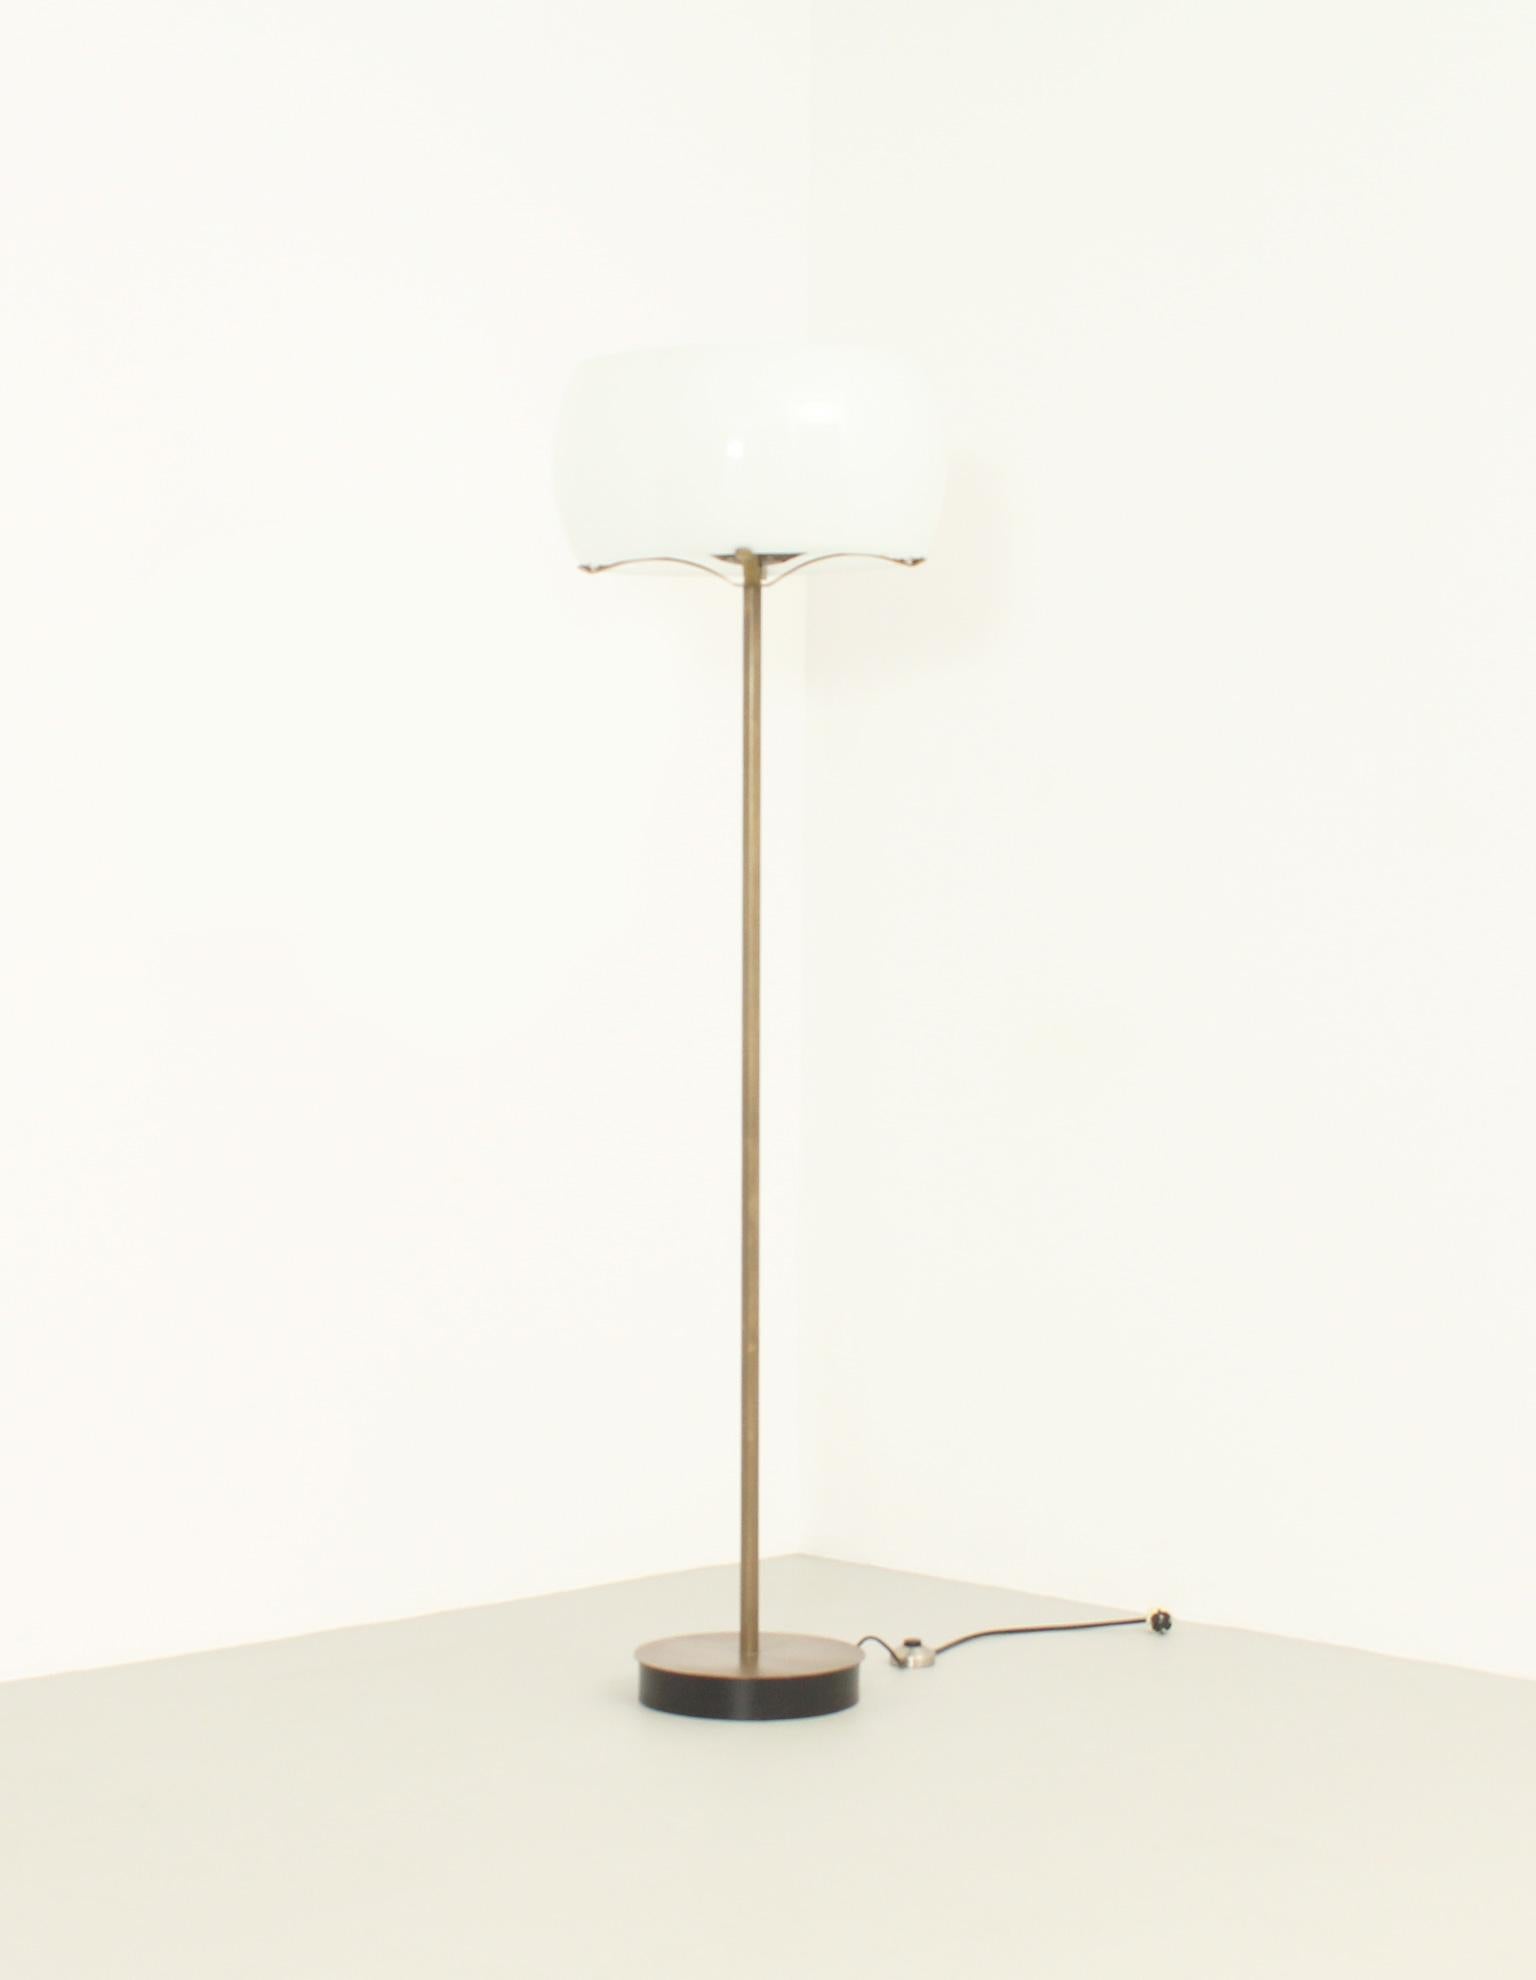 Mid-Century Modern Clitunno Floor Lamp in Bronze Edition by Vico Magistretti for Artemide, 1963 For Sale